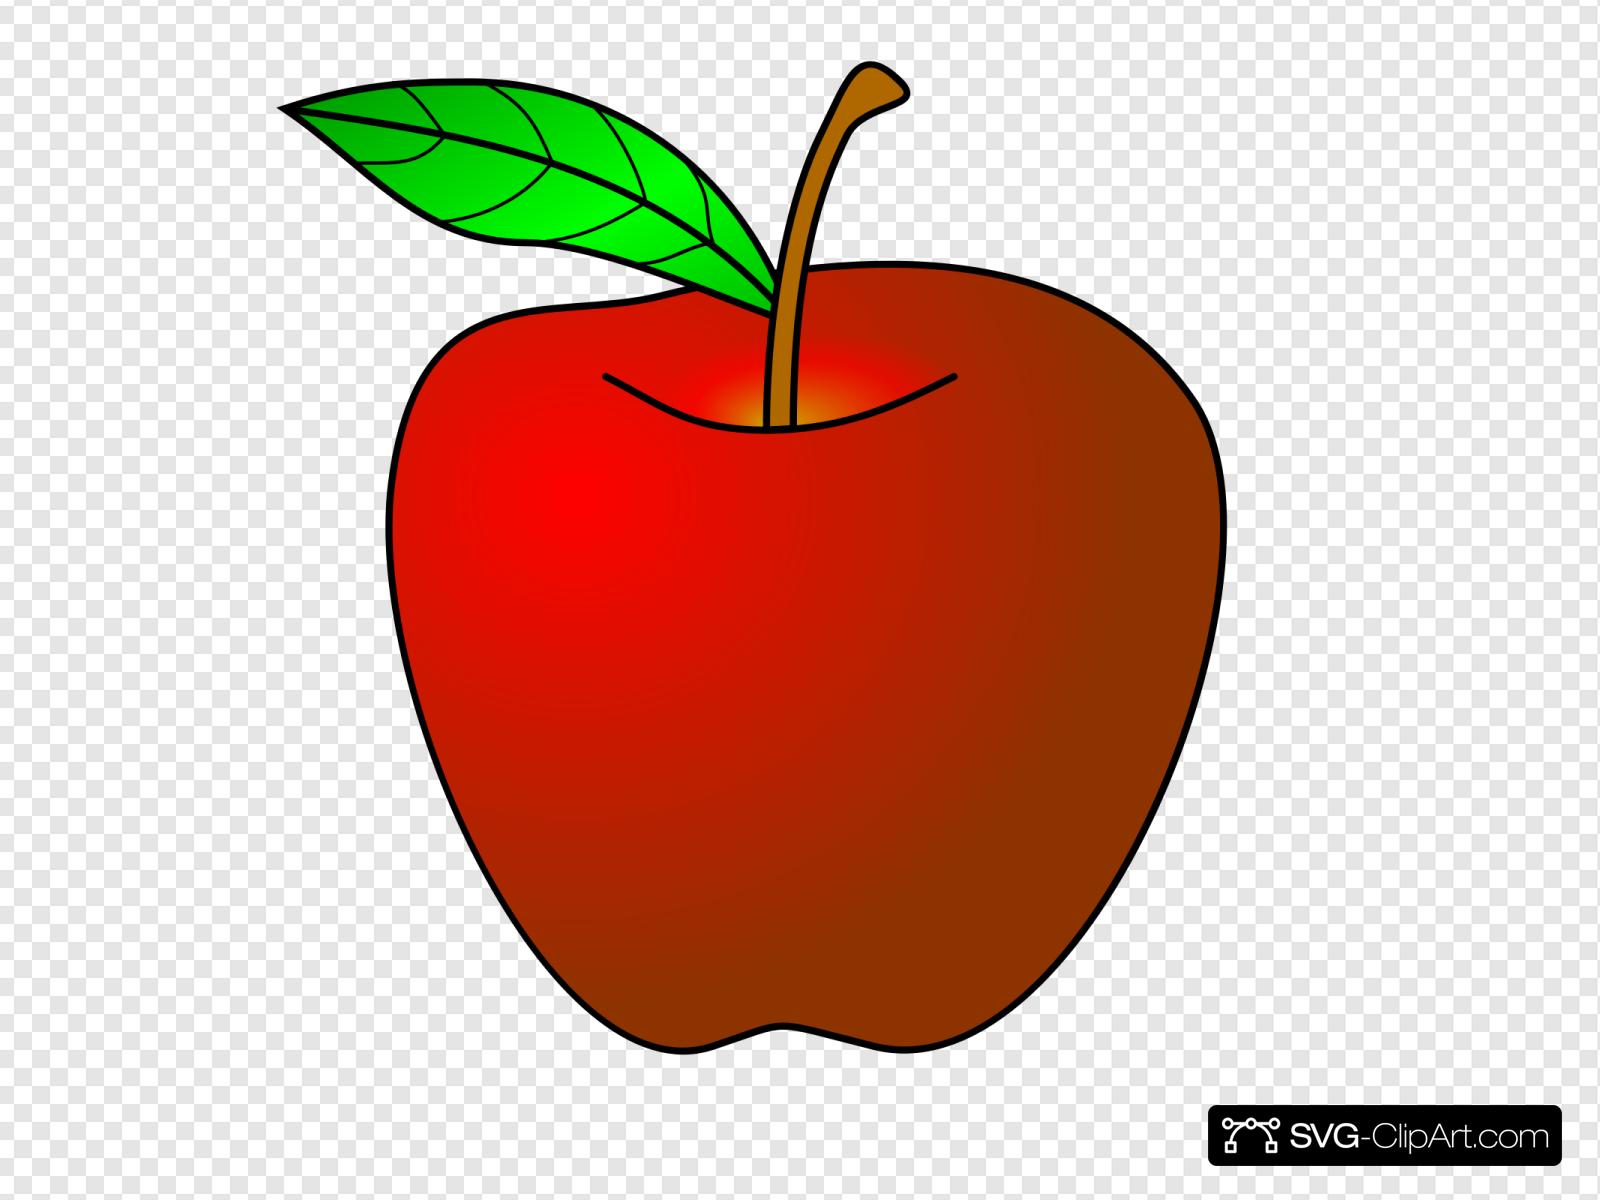 Apple Clip art, Icon and SVG